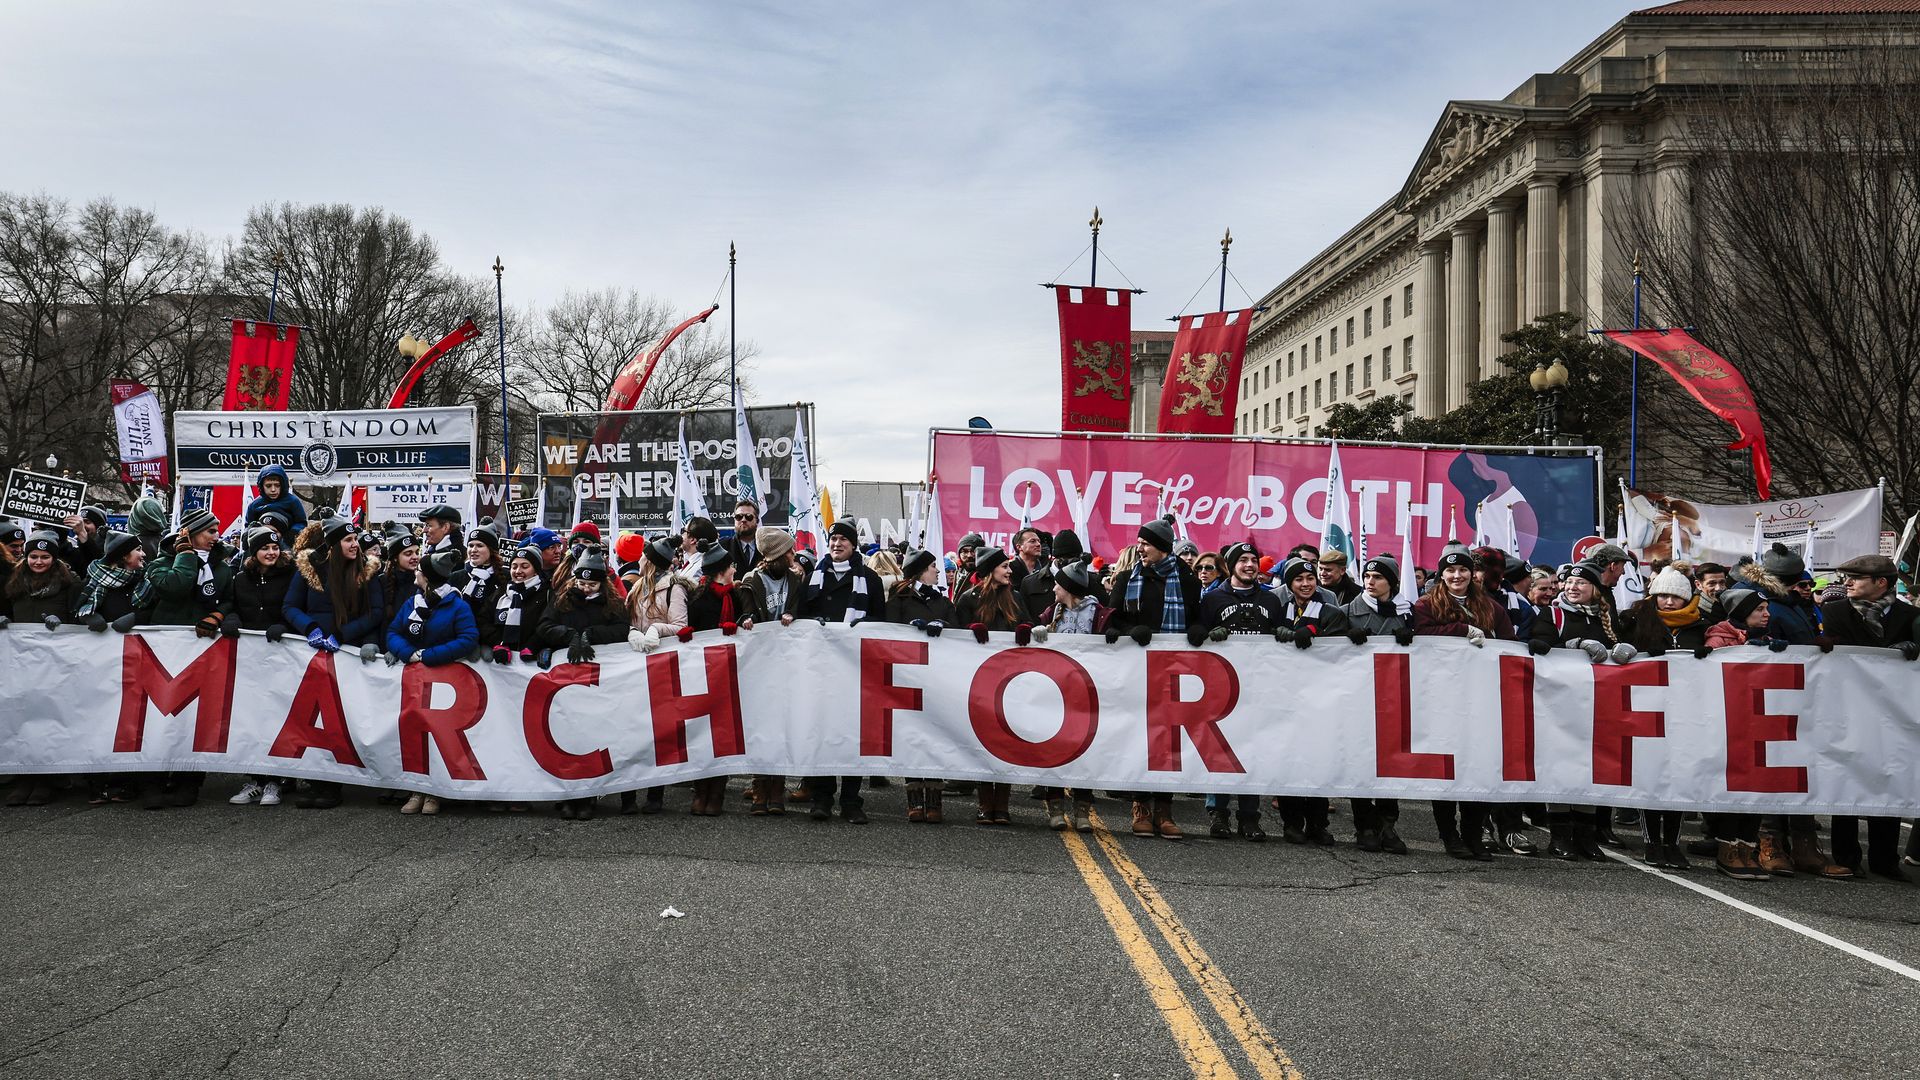 Photo of a crowd of protesters in the streets holding signs, including a long white banner that says "March for Life"